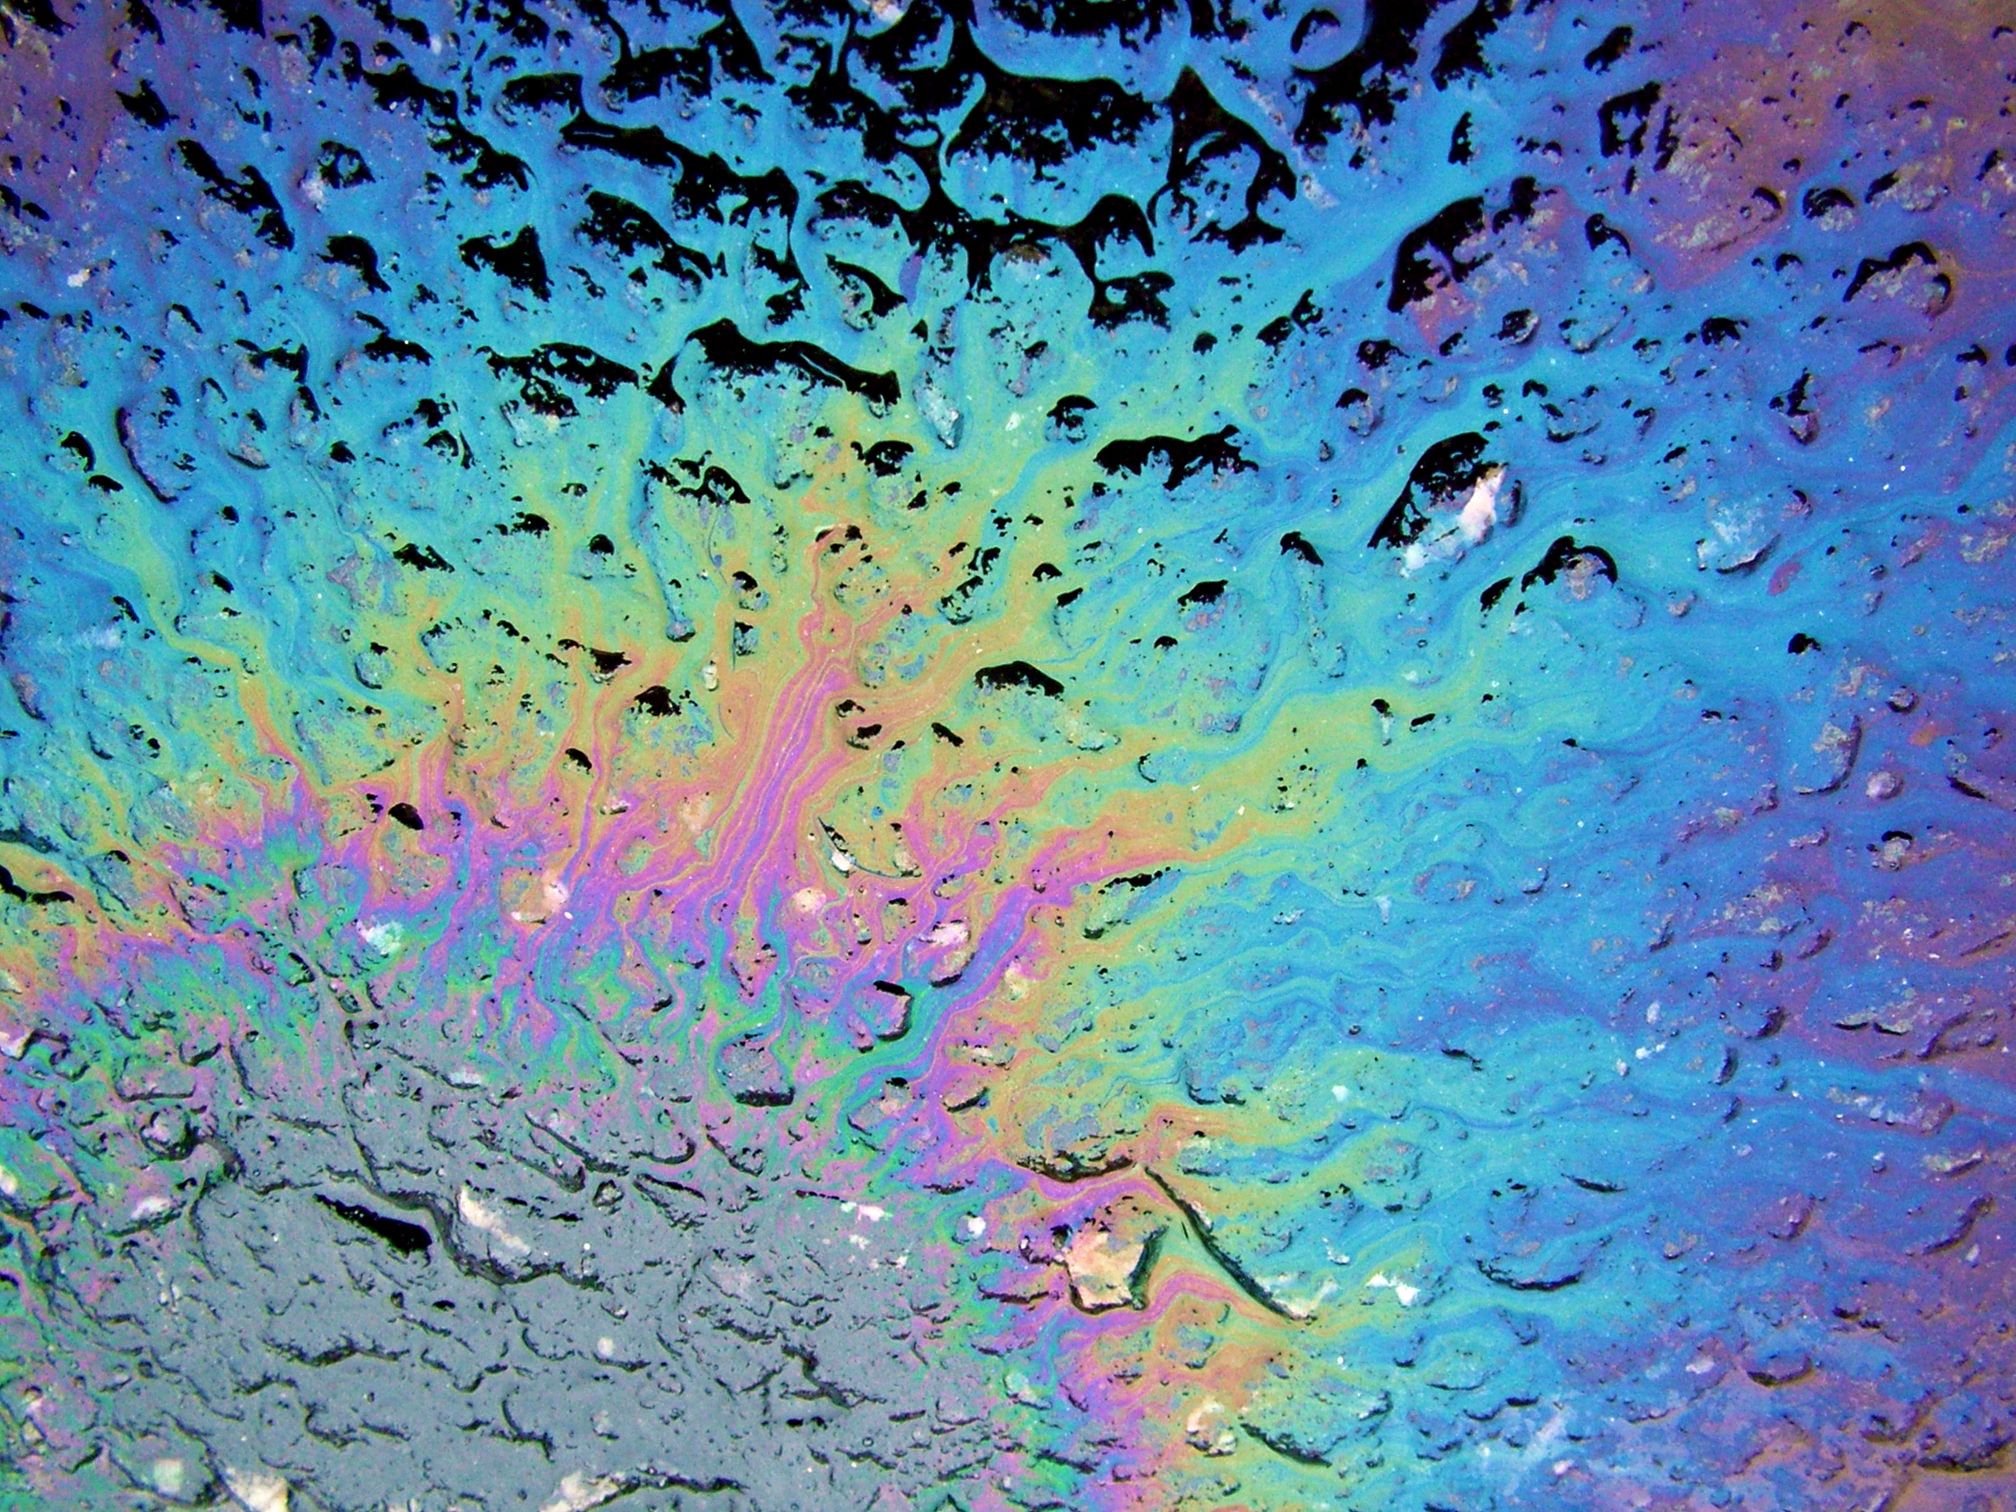 oil spill | Beautiful Pollution: Painting Inspirations | Pinterest ...